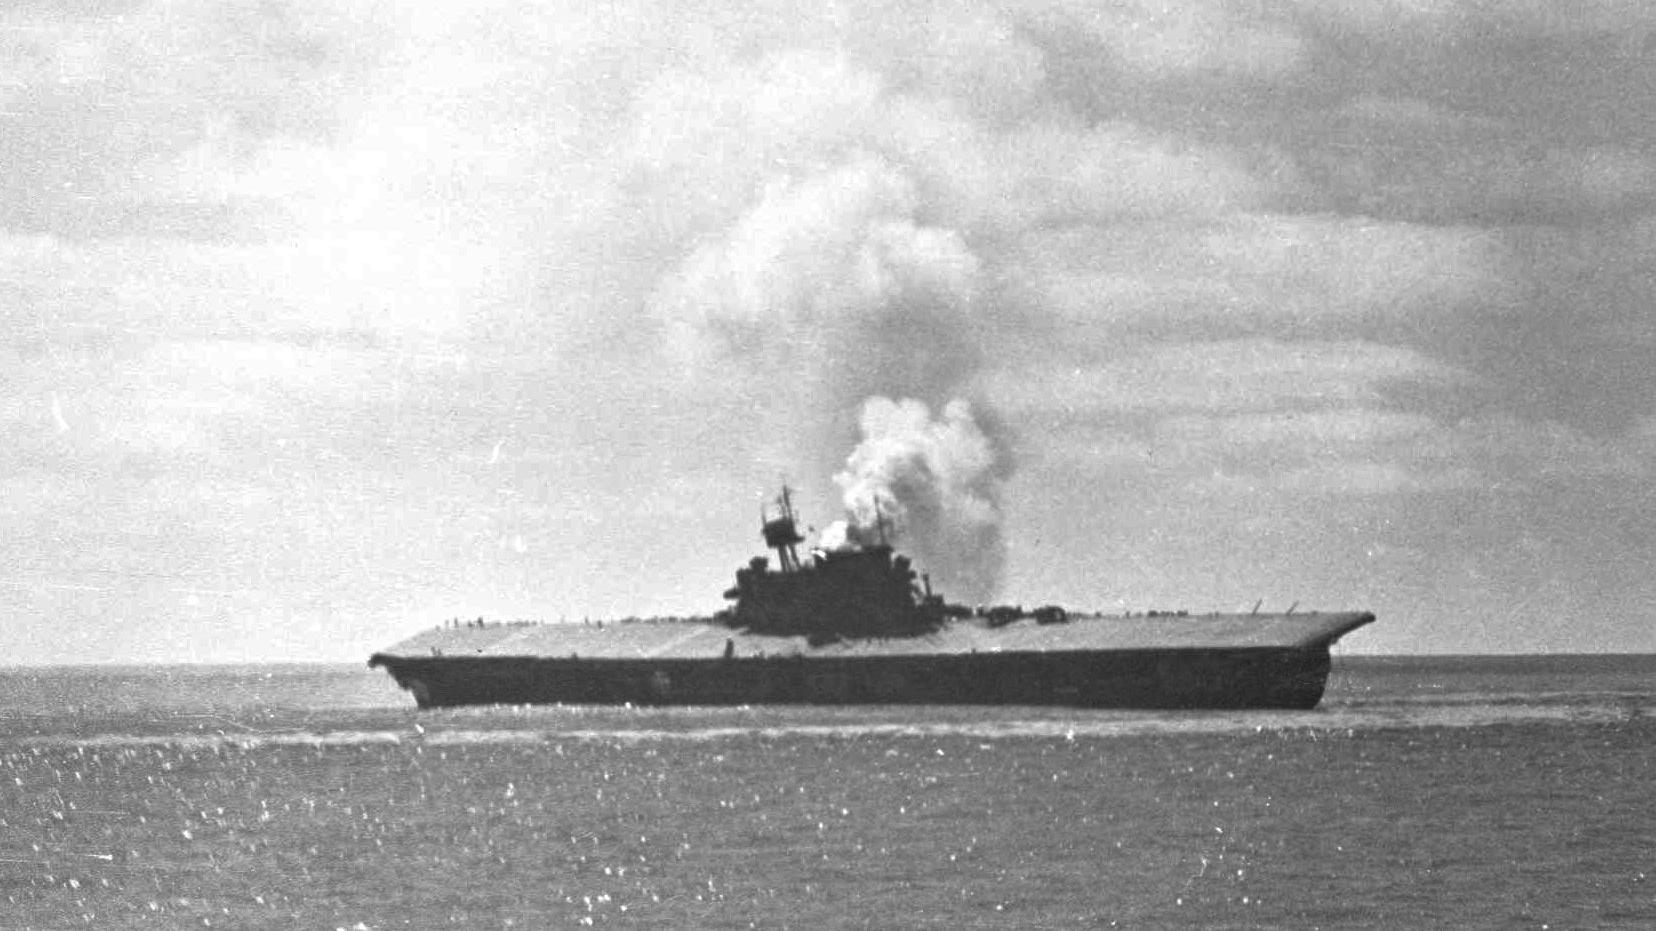 Black and white photo of the CV-5 at Midway 1 sinking